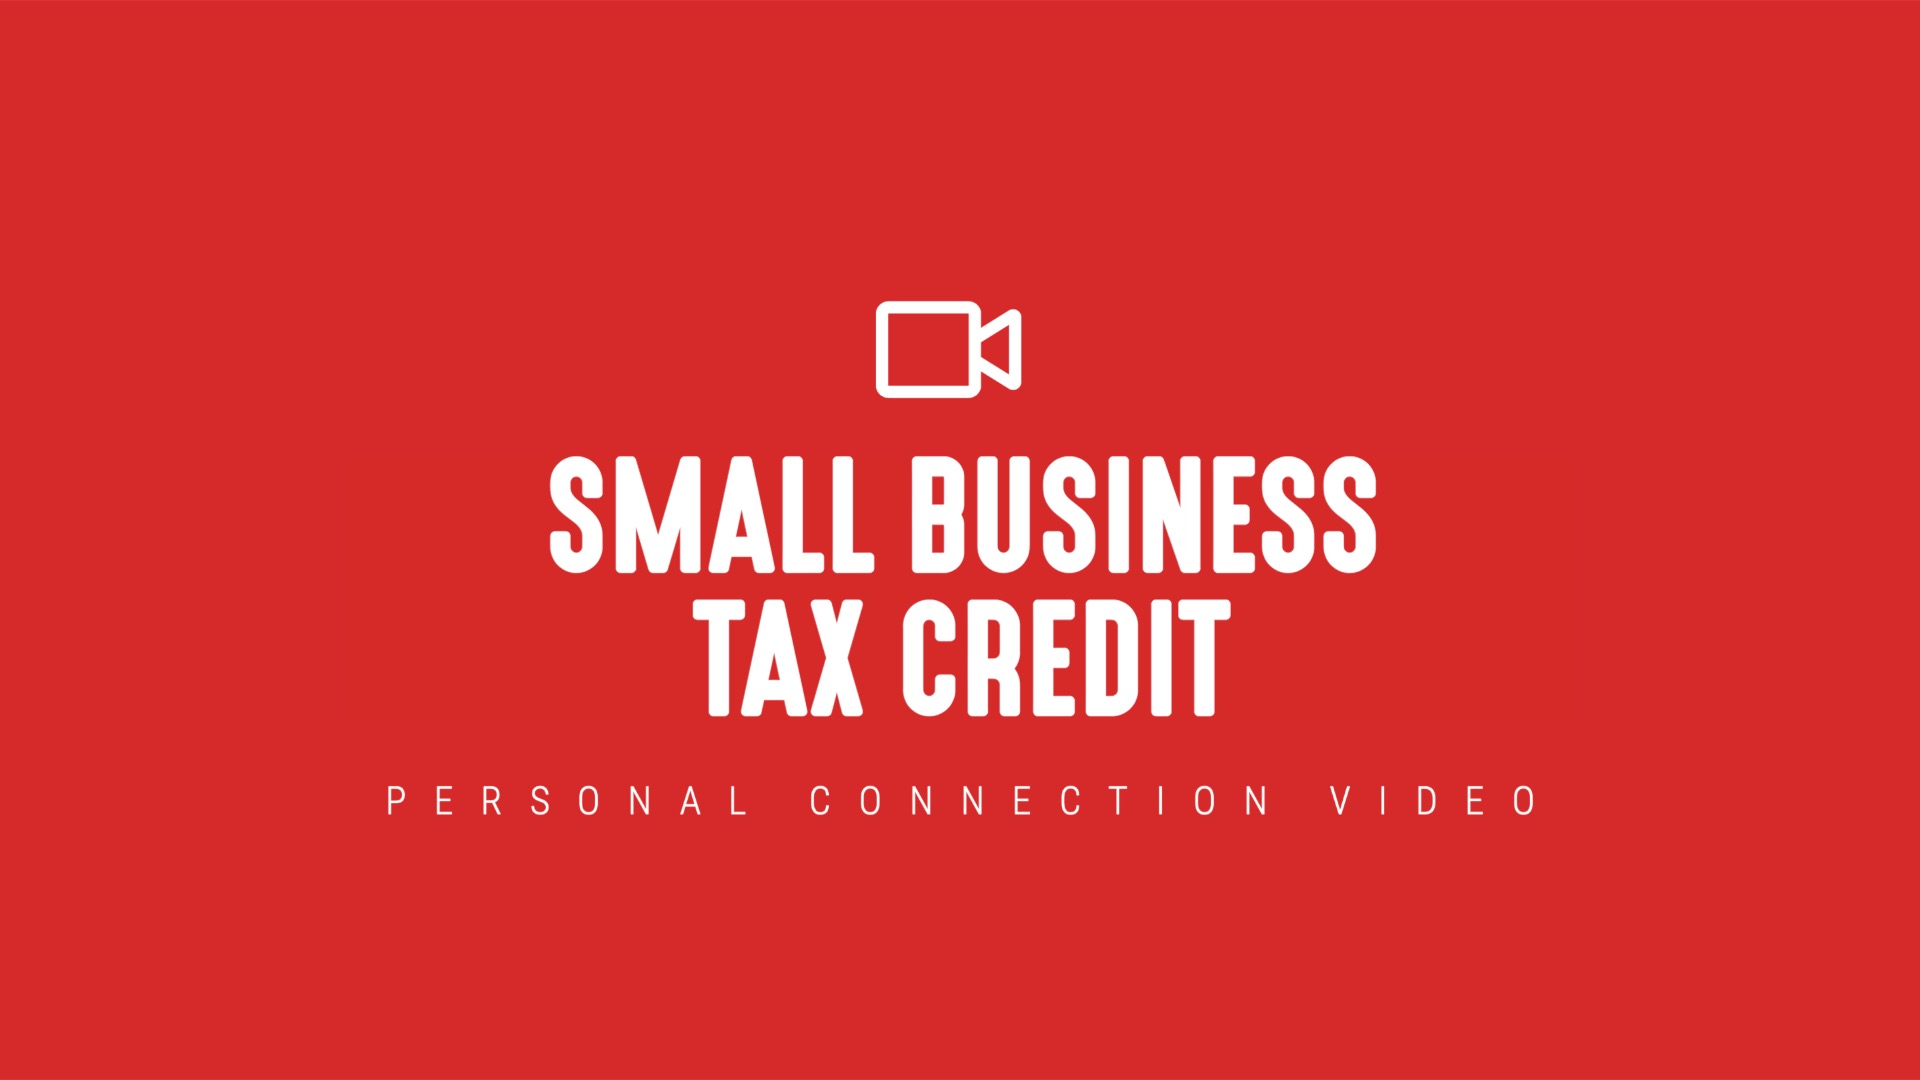 [NEW] Personal Connection Video | Small Business Tax Credit